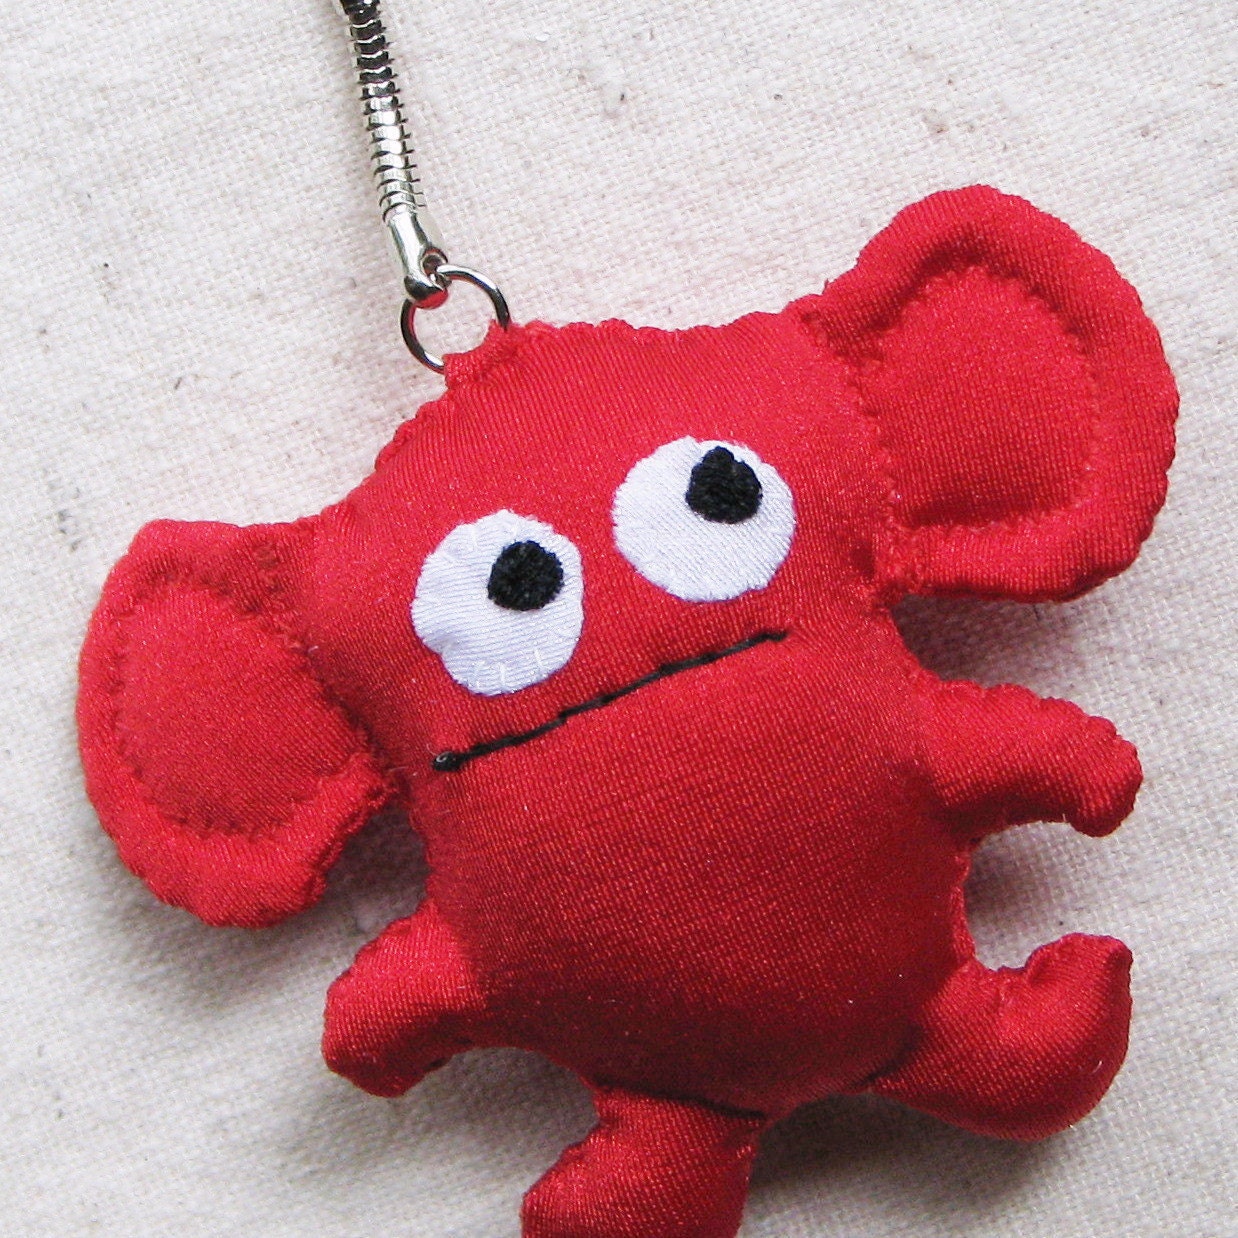 Beastie creature keychain, small plushie monster with googly eyes, fire engine red